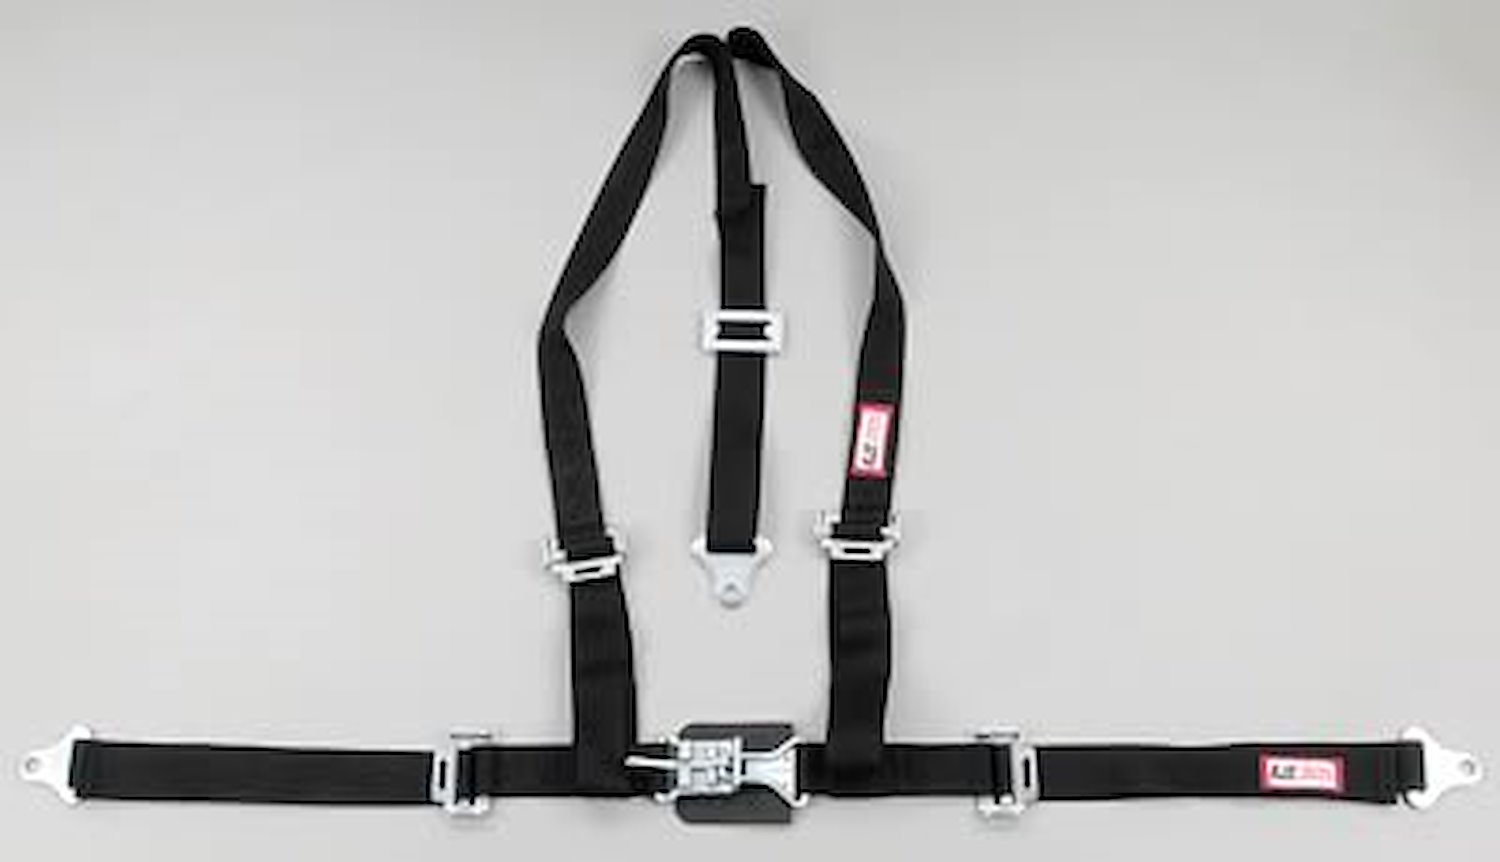 NON-SFI L&L HARNESS 2 PULL DOWN Lap Belt SNAP SEWN IN 2 S.H. Individual ROLL BAR Mount WRAP/BOLT GRAY